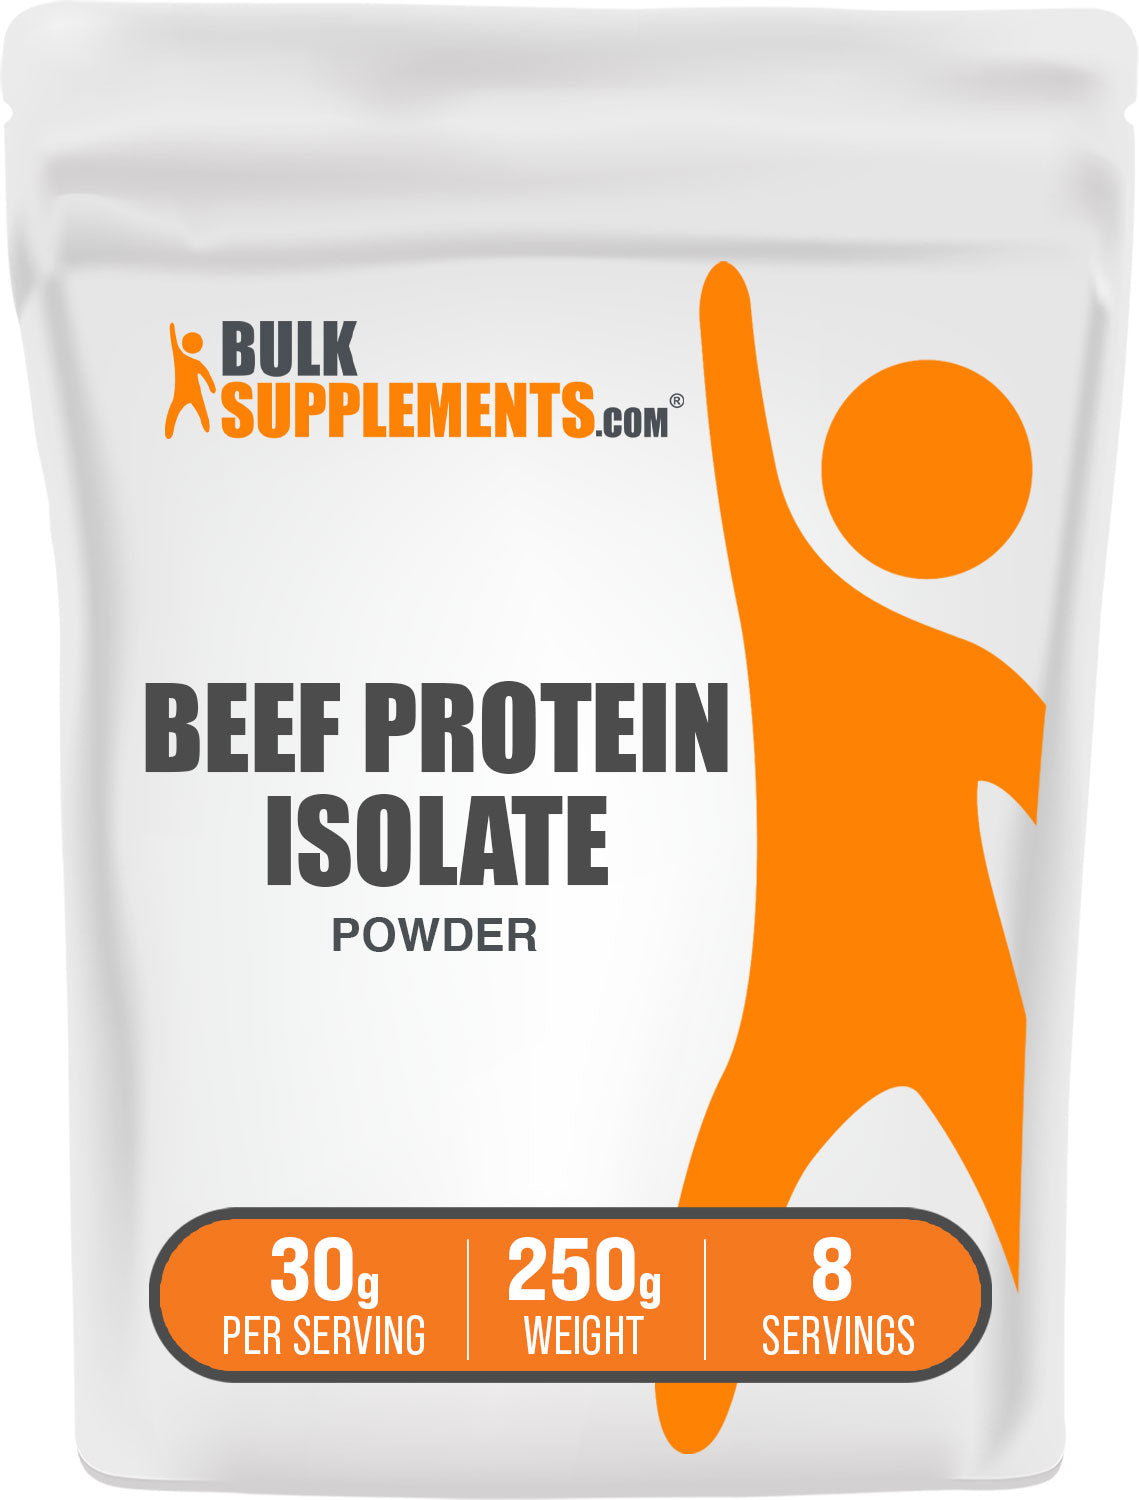 BulkSupplements.com Beef Protein Isolate powder bag 250g